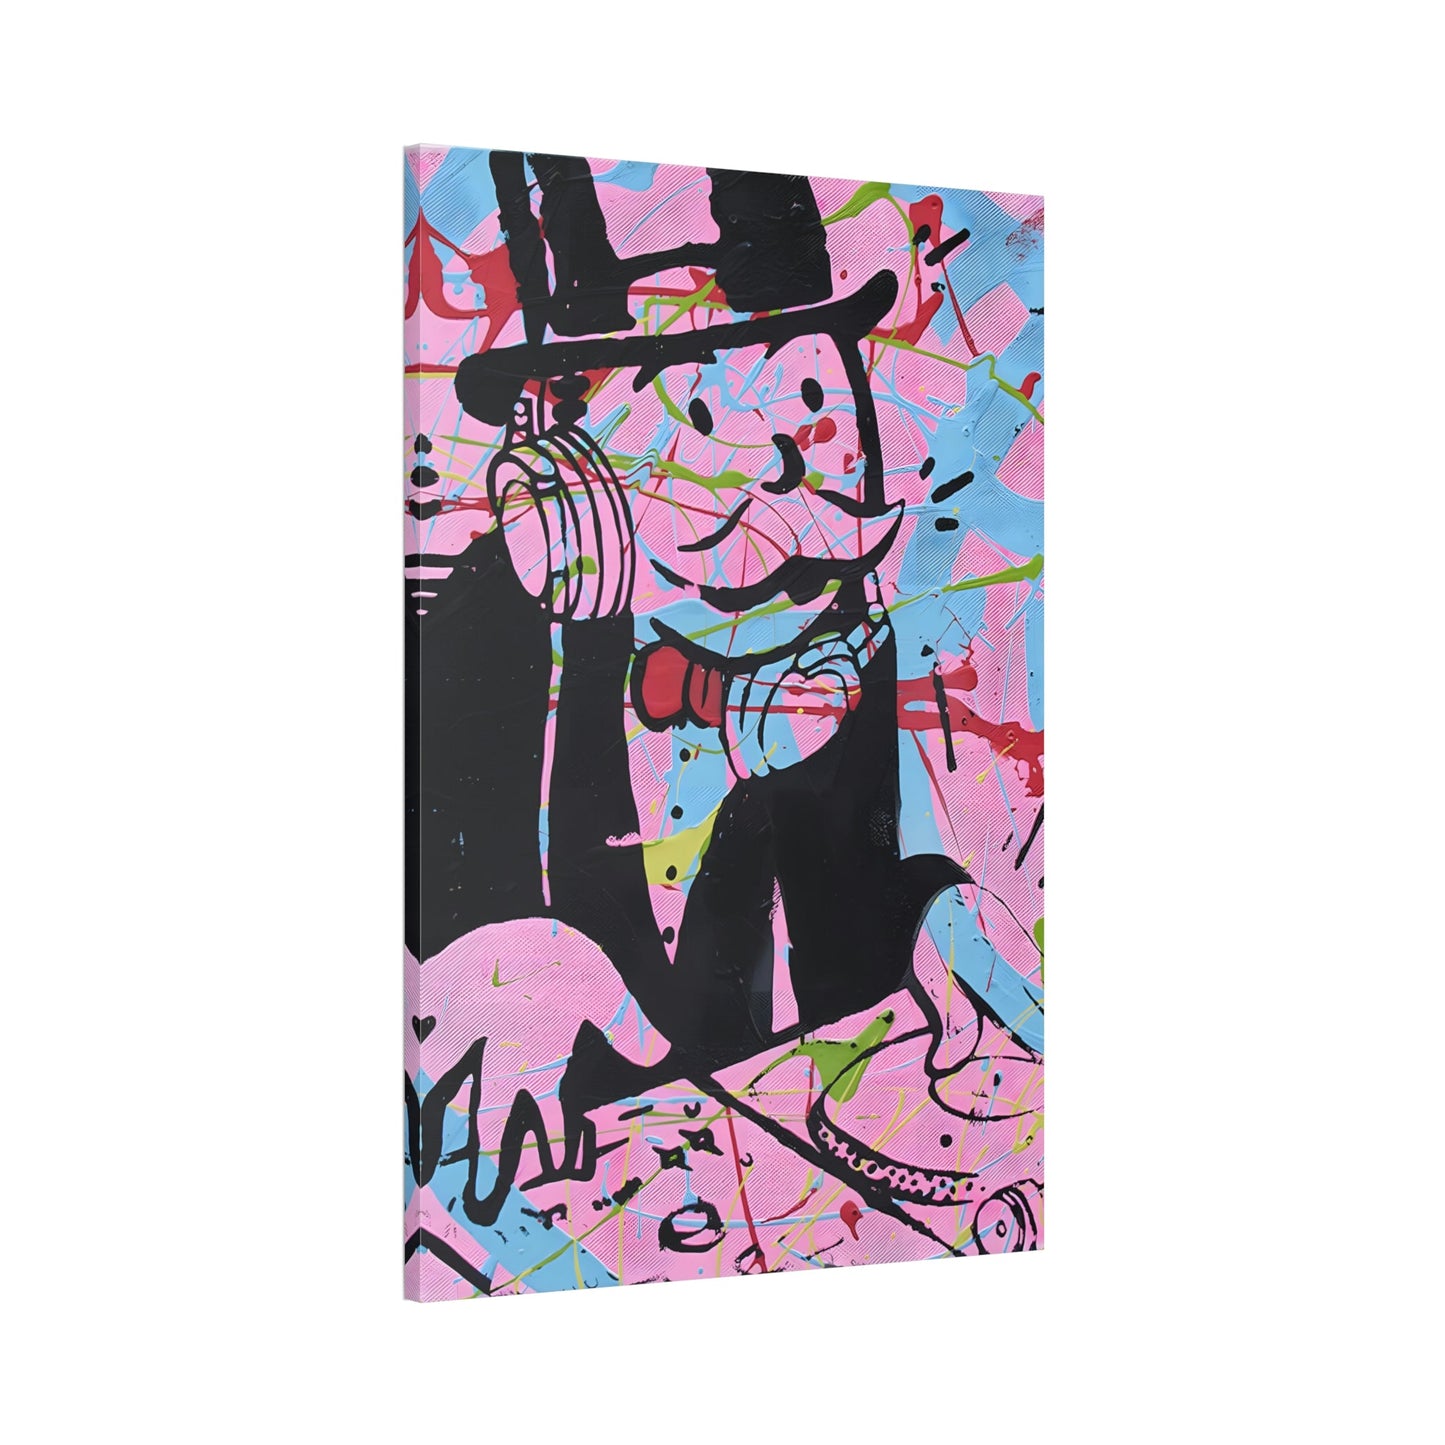 Pop Art Icon: Eye-Catching Wall Art Prints of Alec Monopoly's Iconic Graffiti Style on Natural Canva